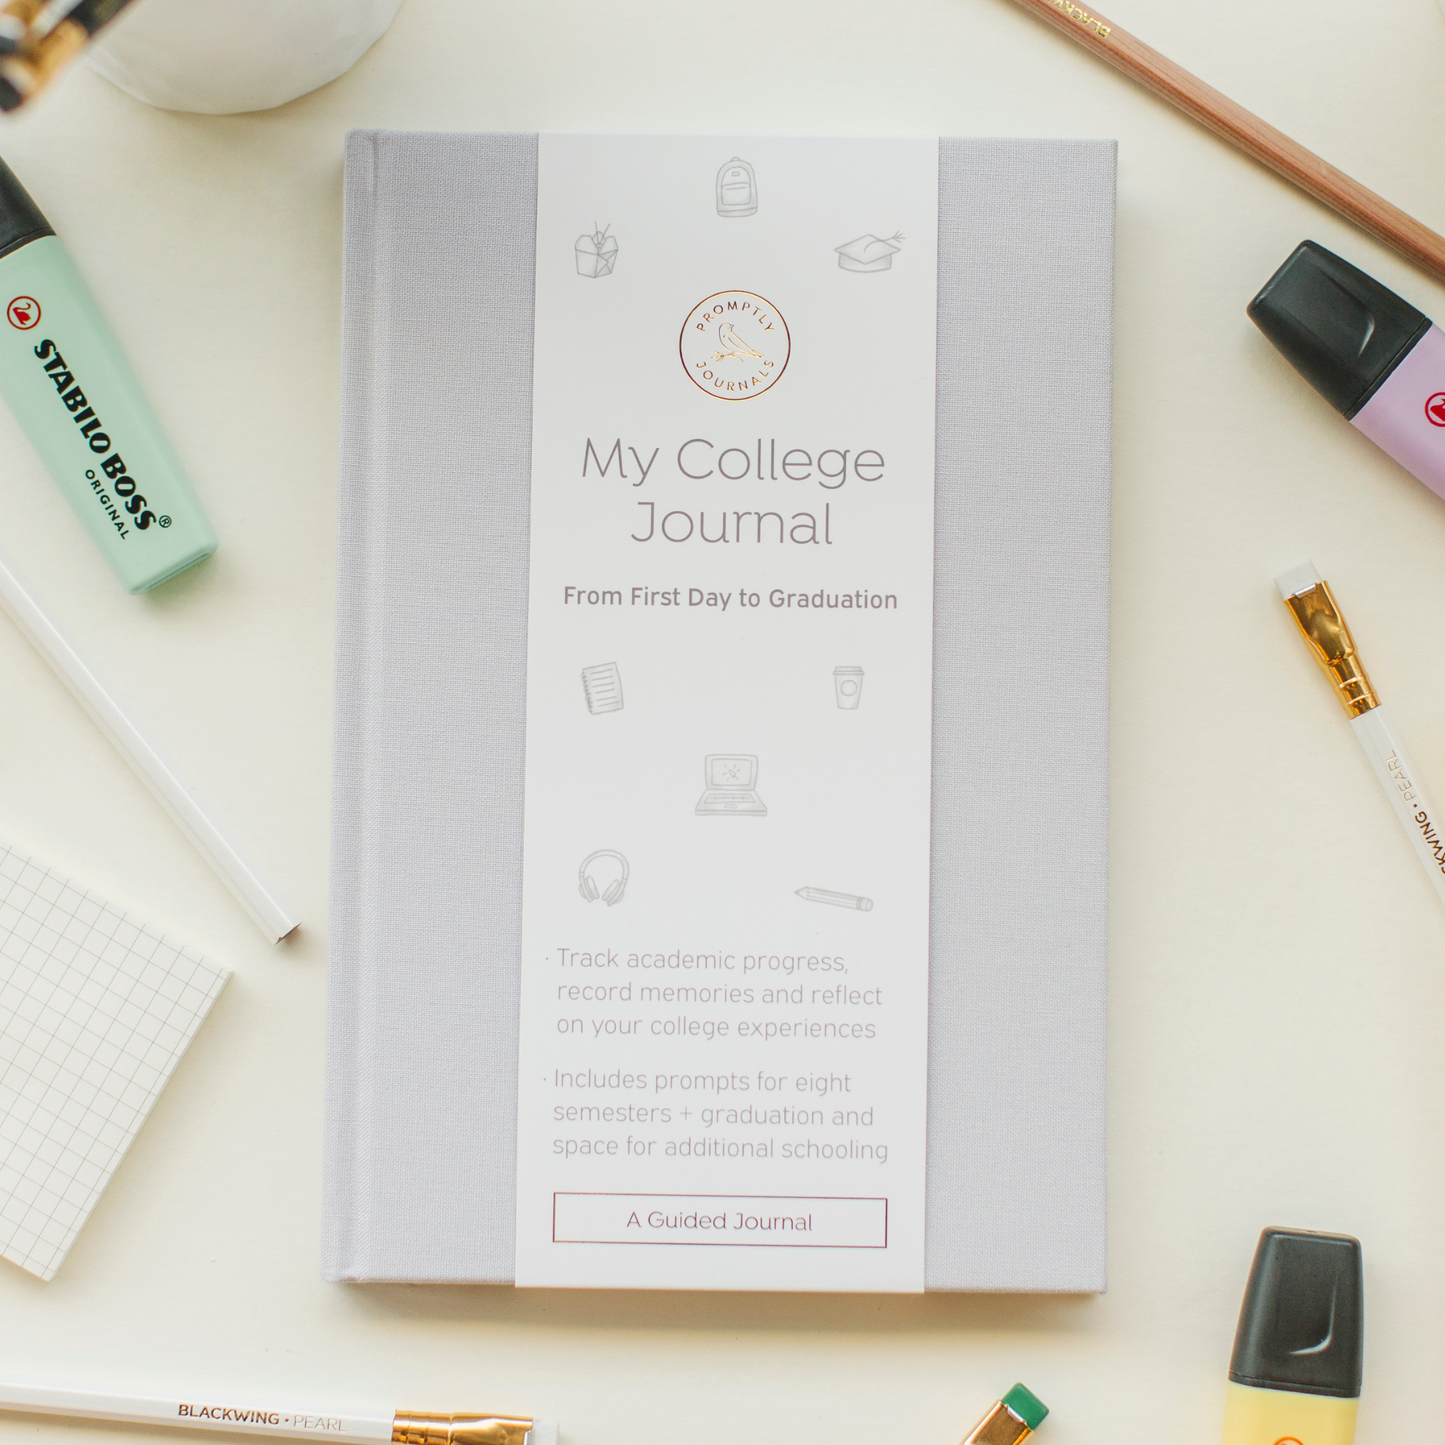 My College Journal: From First Day to Graduation (Lavender) by Promptly Journals